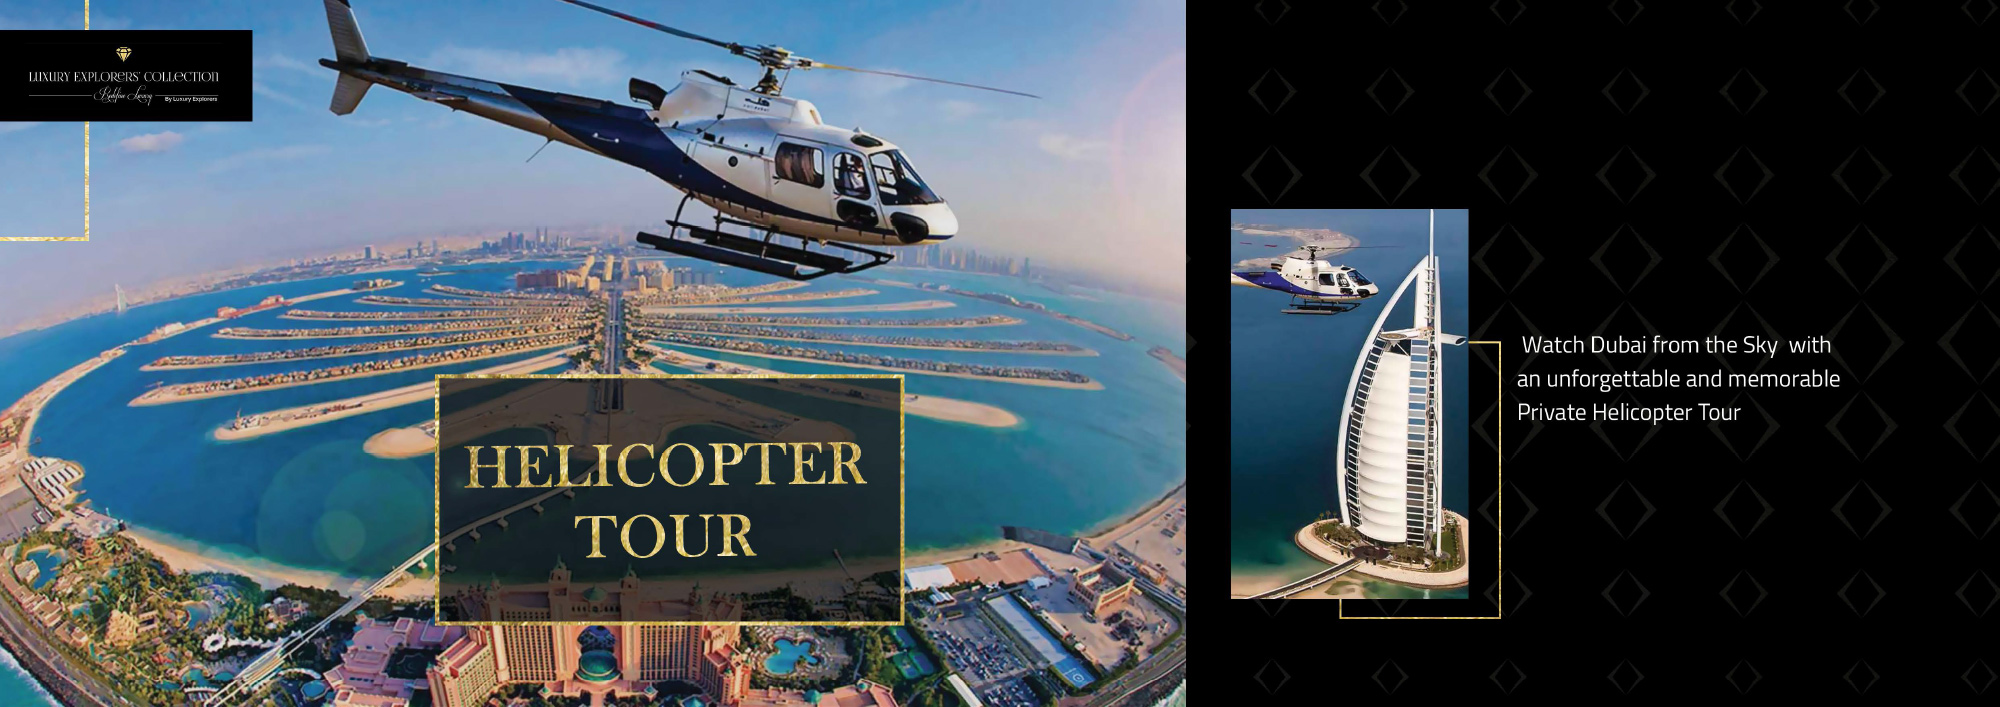 Helicopter-Tour